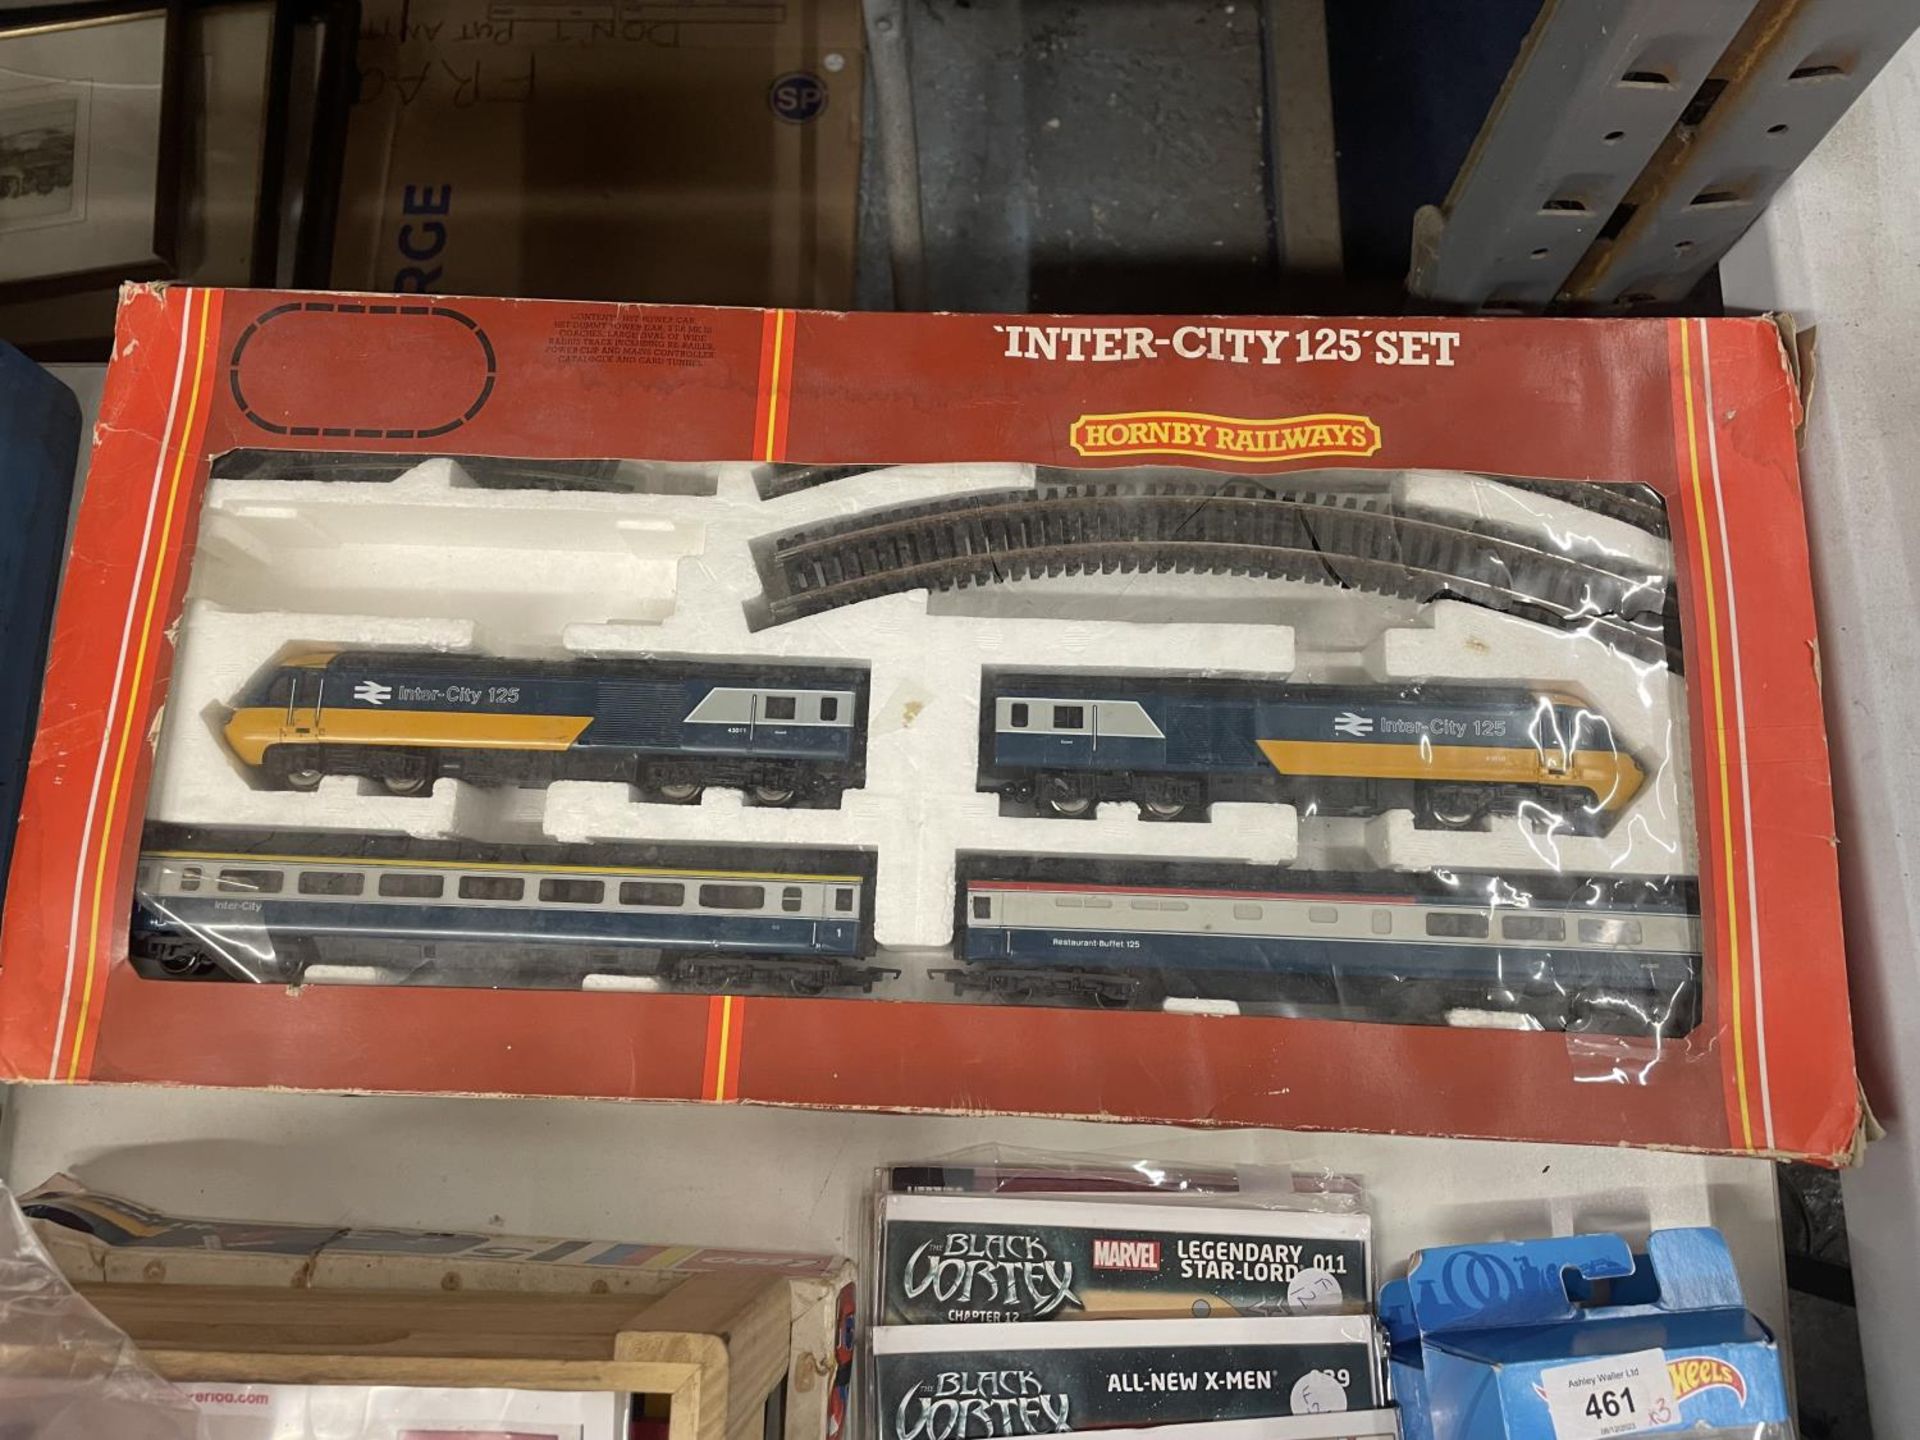 A BOXED HORNBY RAILWAYS INTER-CITY 125 SET PLUS TWO ADDITIONAL BOXED COACHES - Image 2 of 3